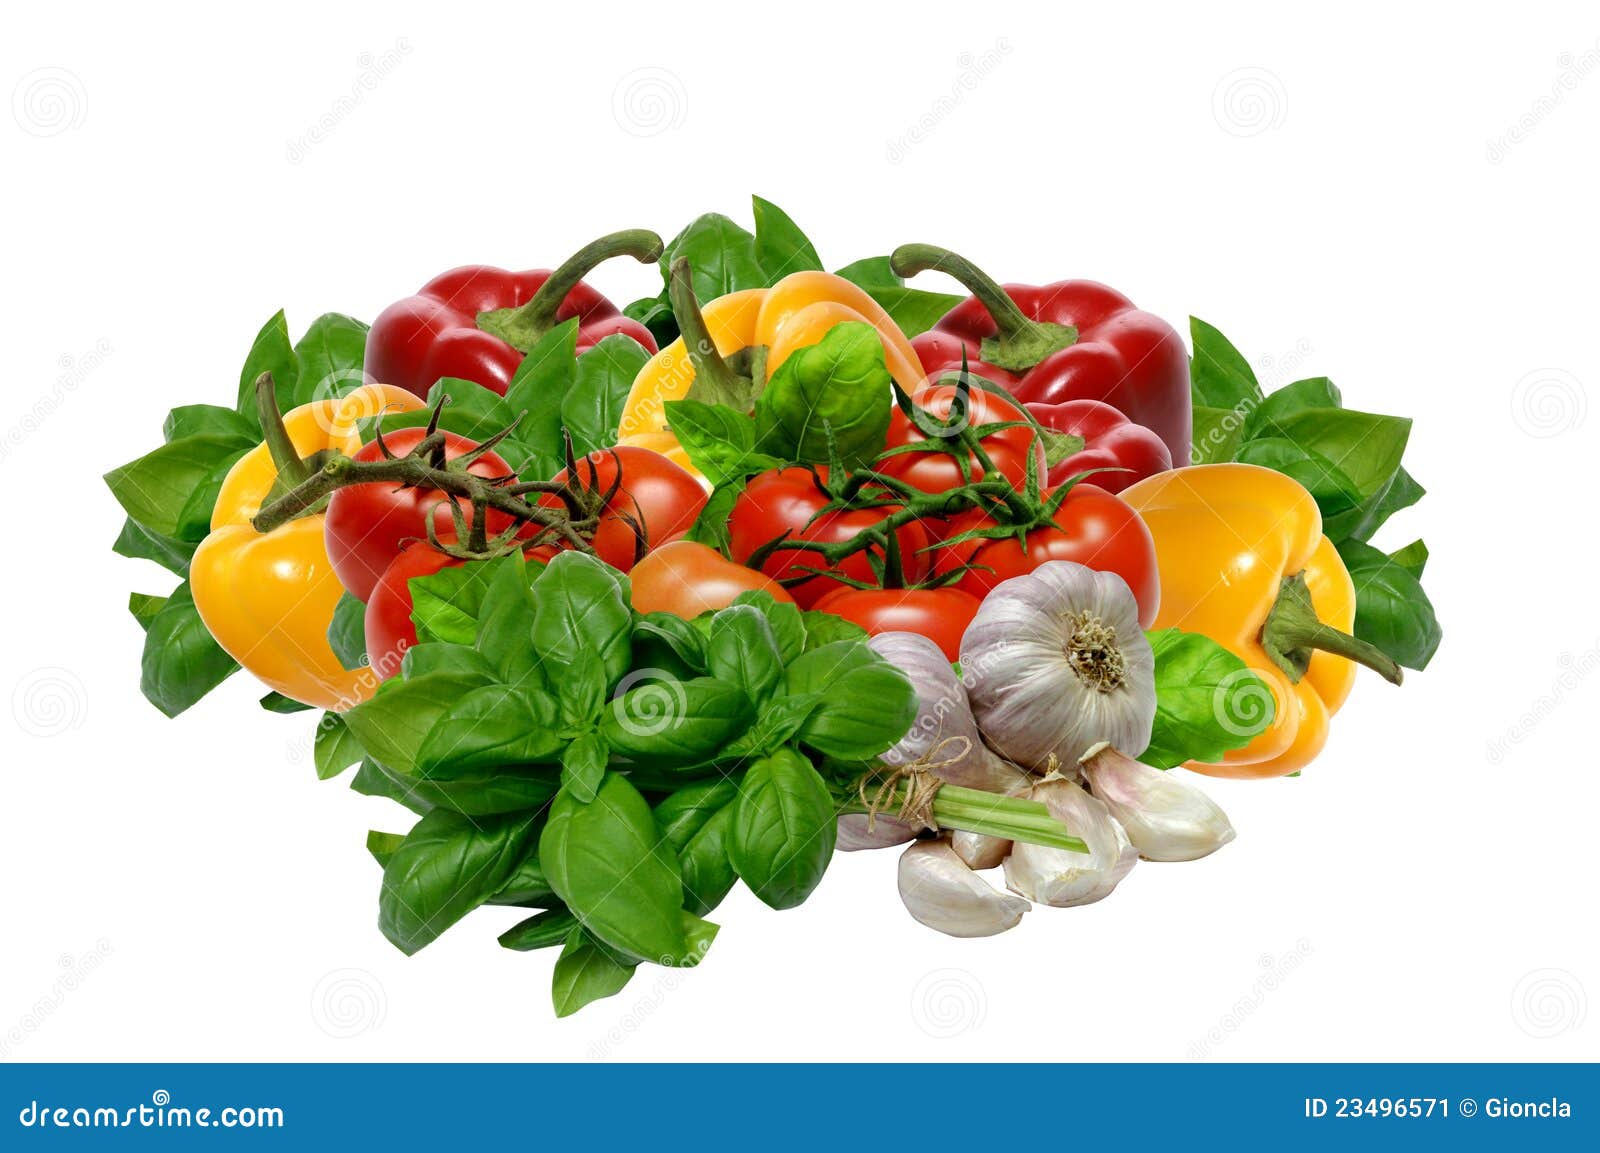 Poto stock image. Image of sauce, cooking, vegetables - 23496571